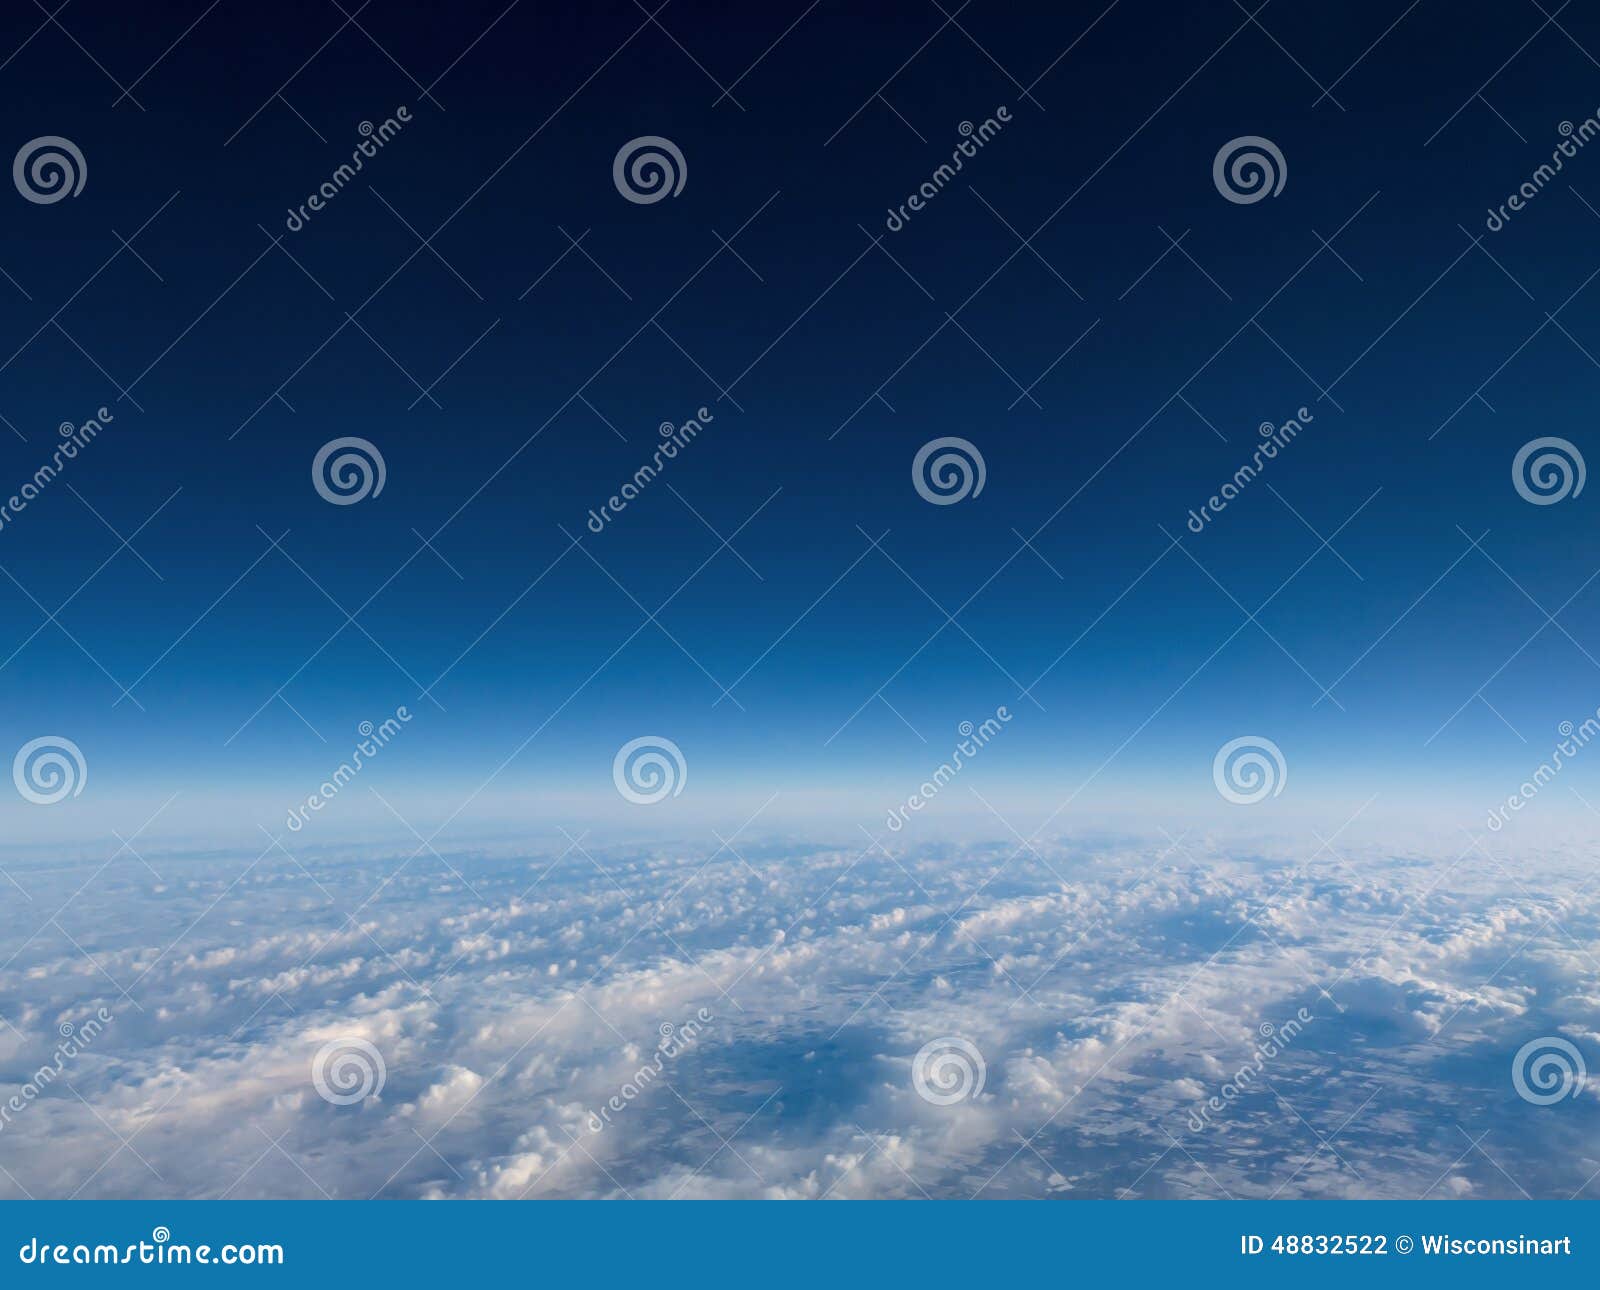 above clouds blue sky background